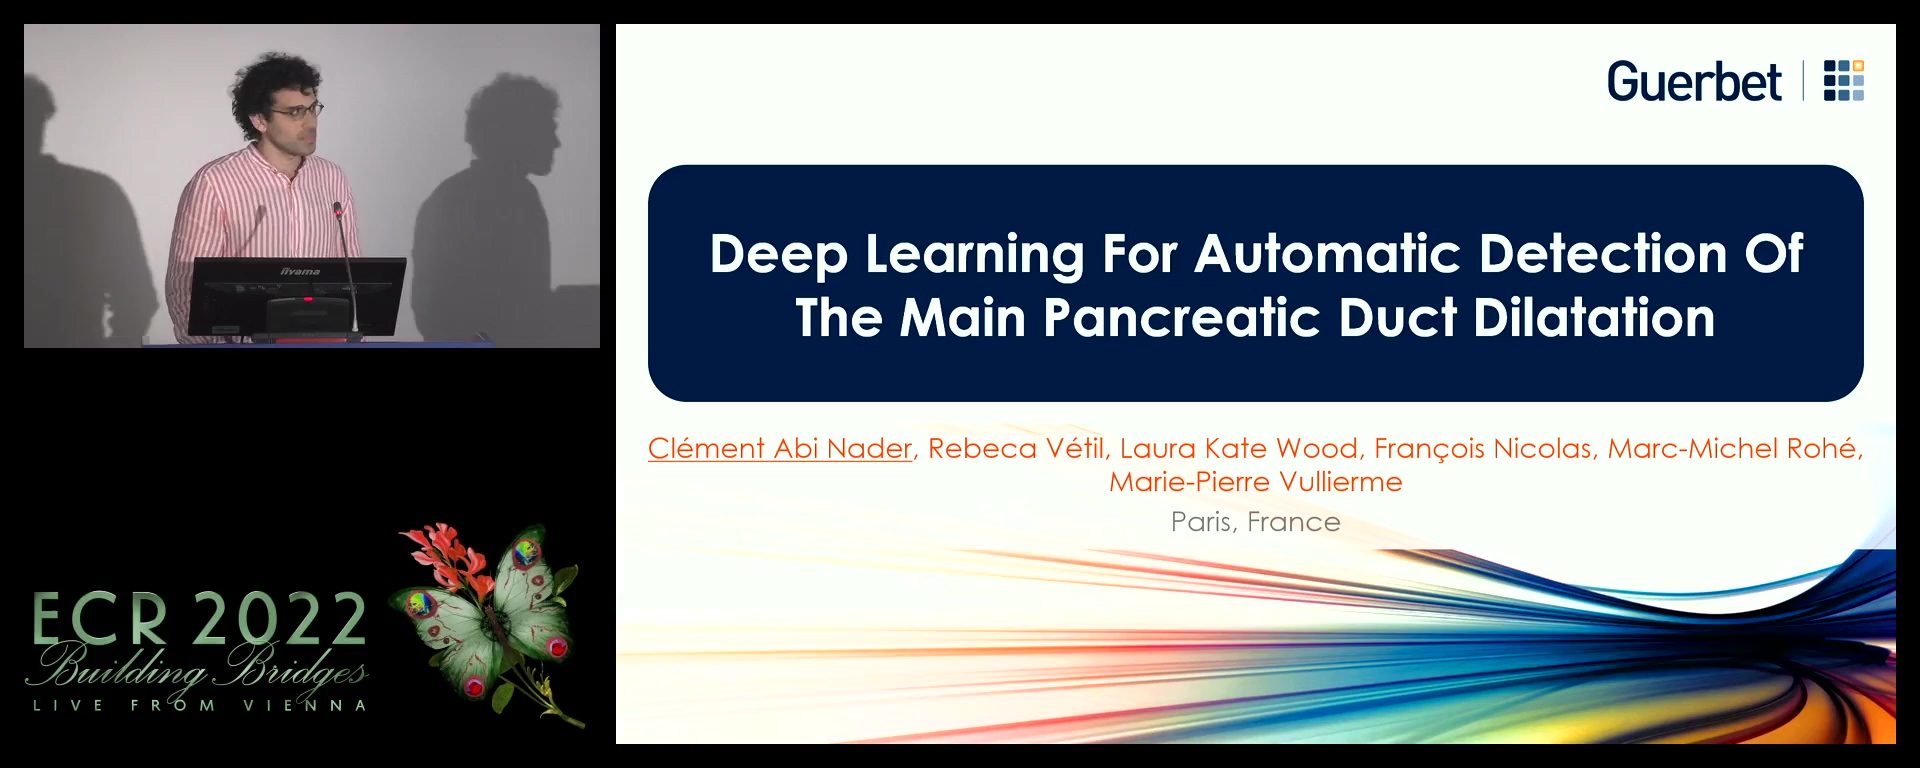 Deep learning for automatic detection of the main pancreatic duct dilatation - Clément Abi Nader, Paris / FR